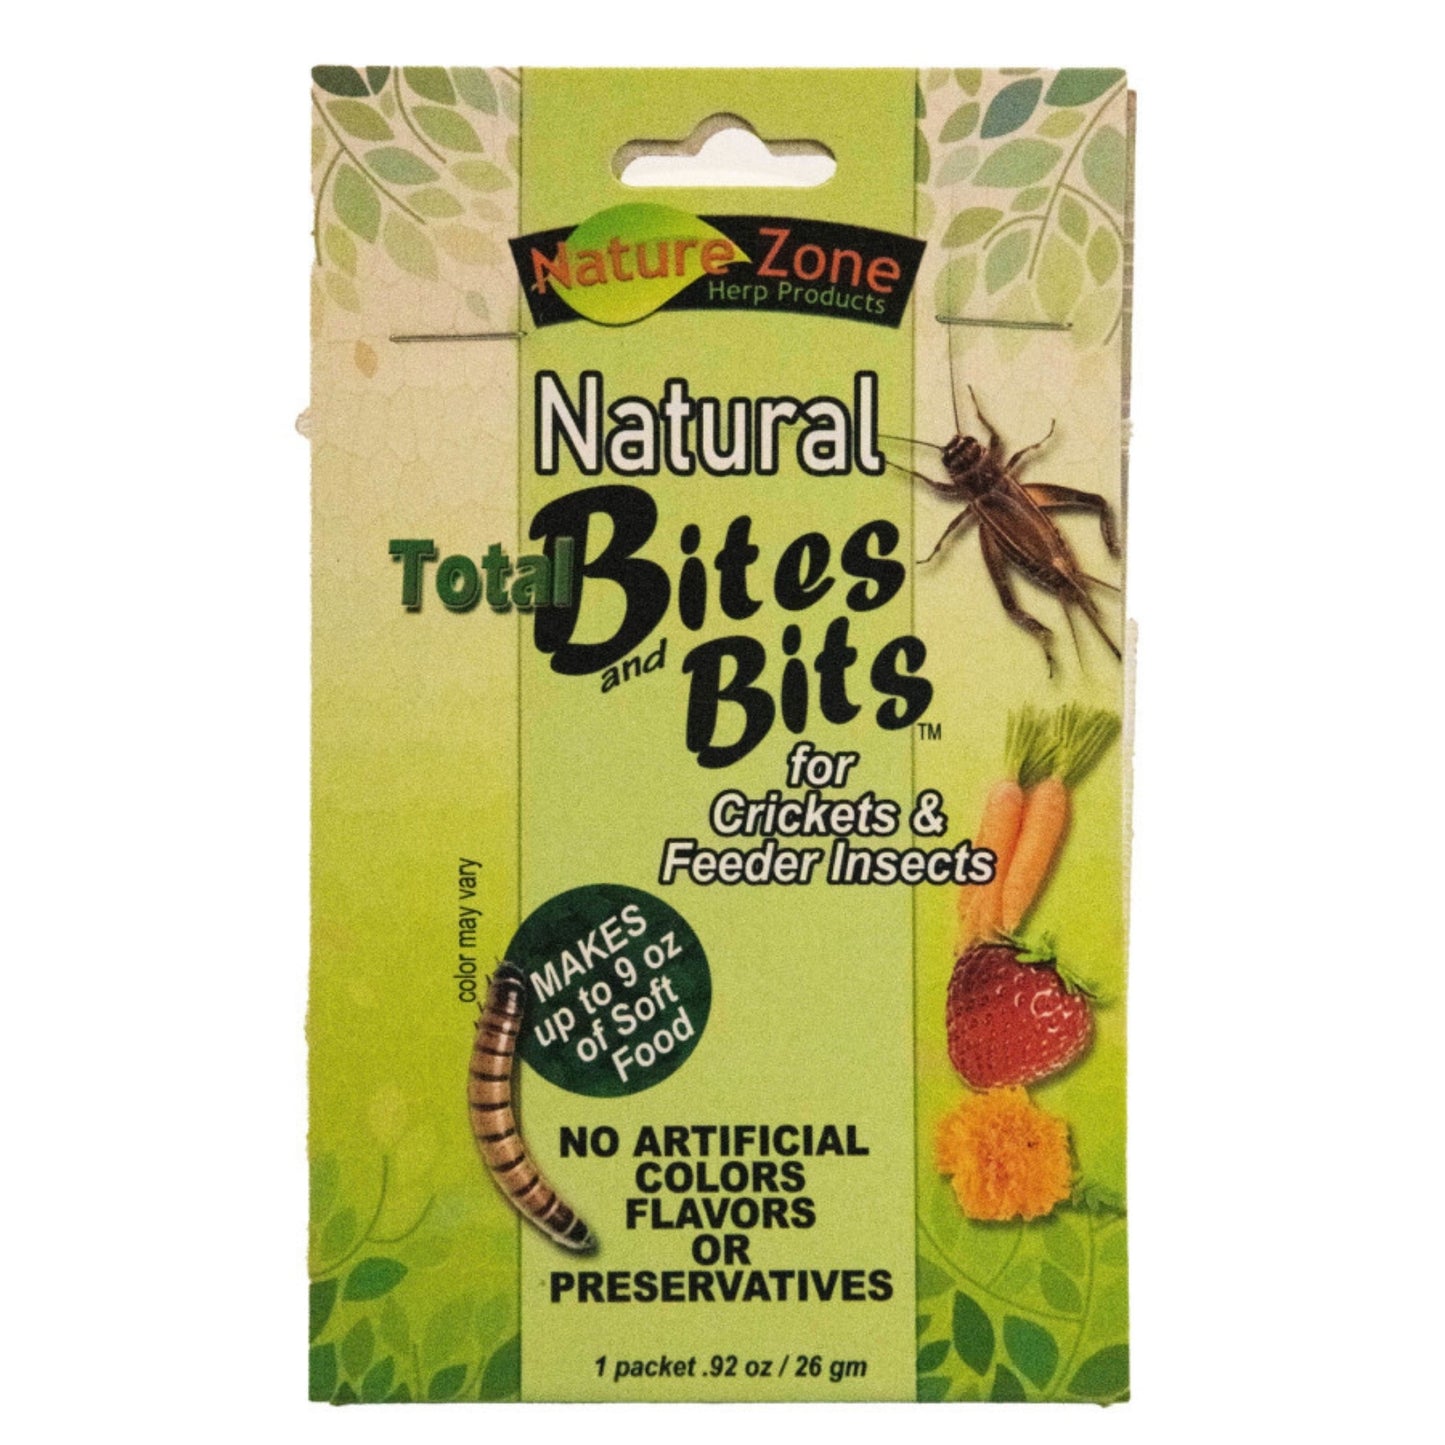 Nature Zone Natural Total Bites & Bits for Crickets & Feeder insects 1ea/.92oz.